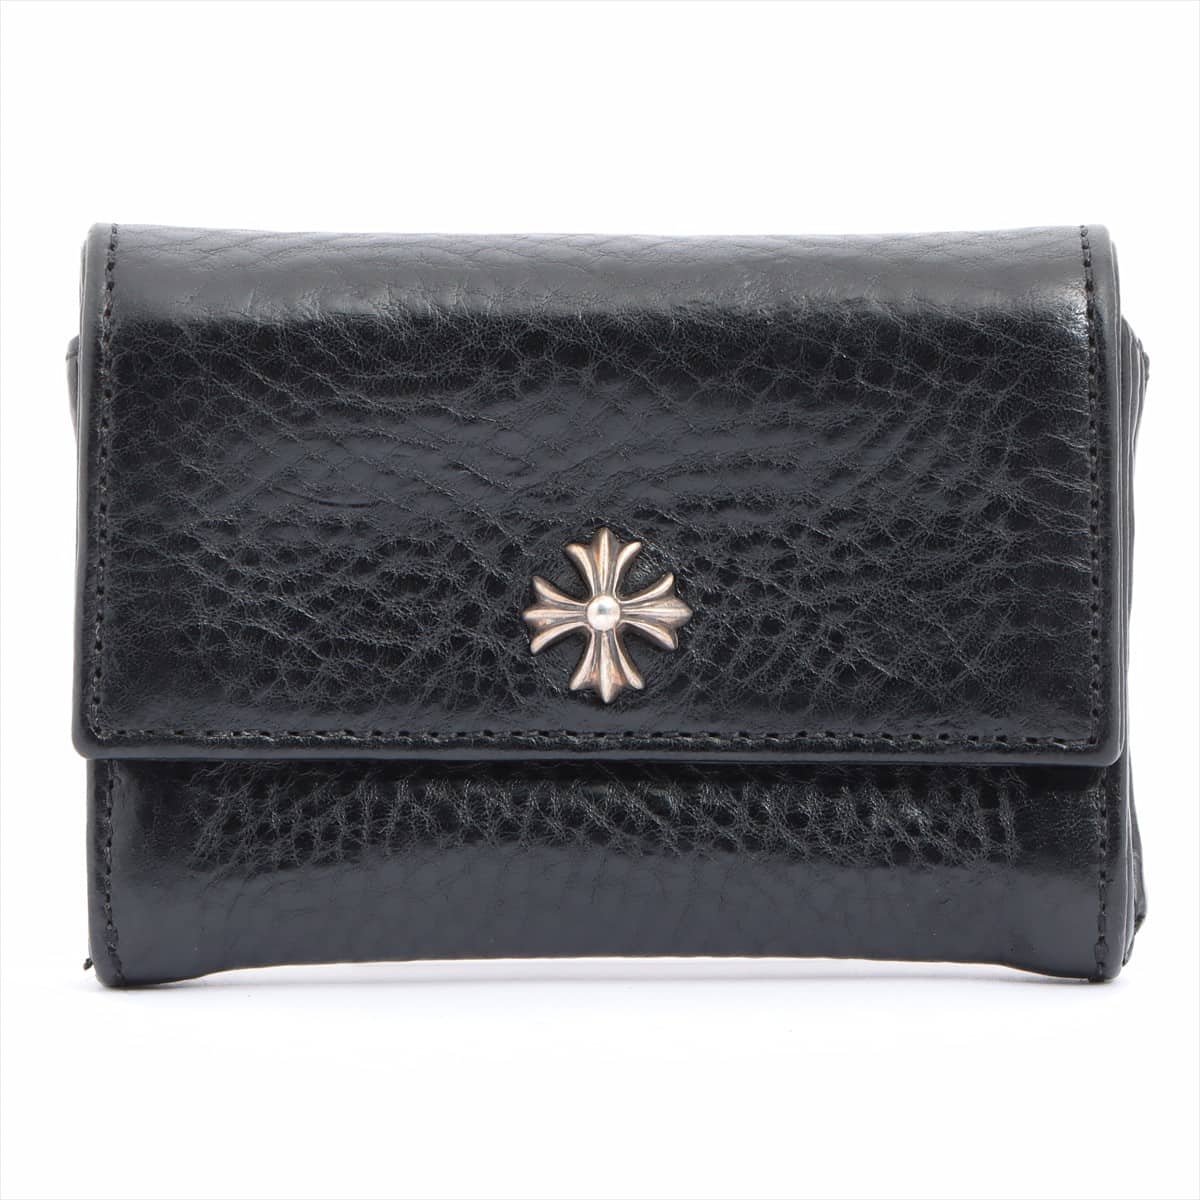 Chrome Hearts Tiny wallets Wallet Leather With invoice CH plus